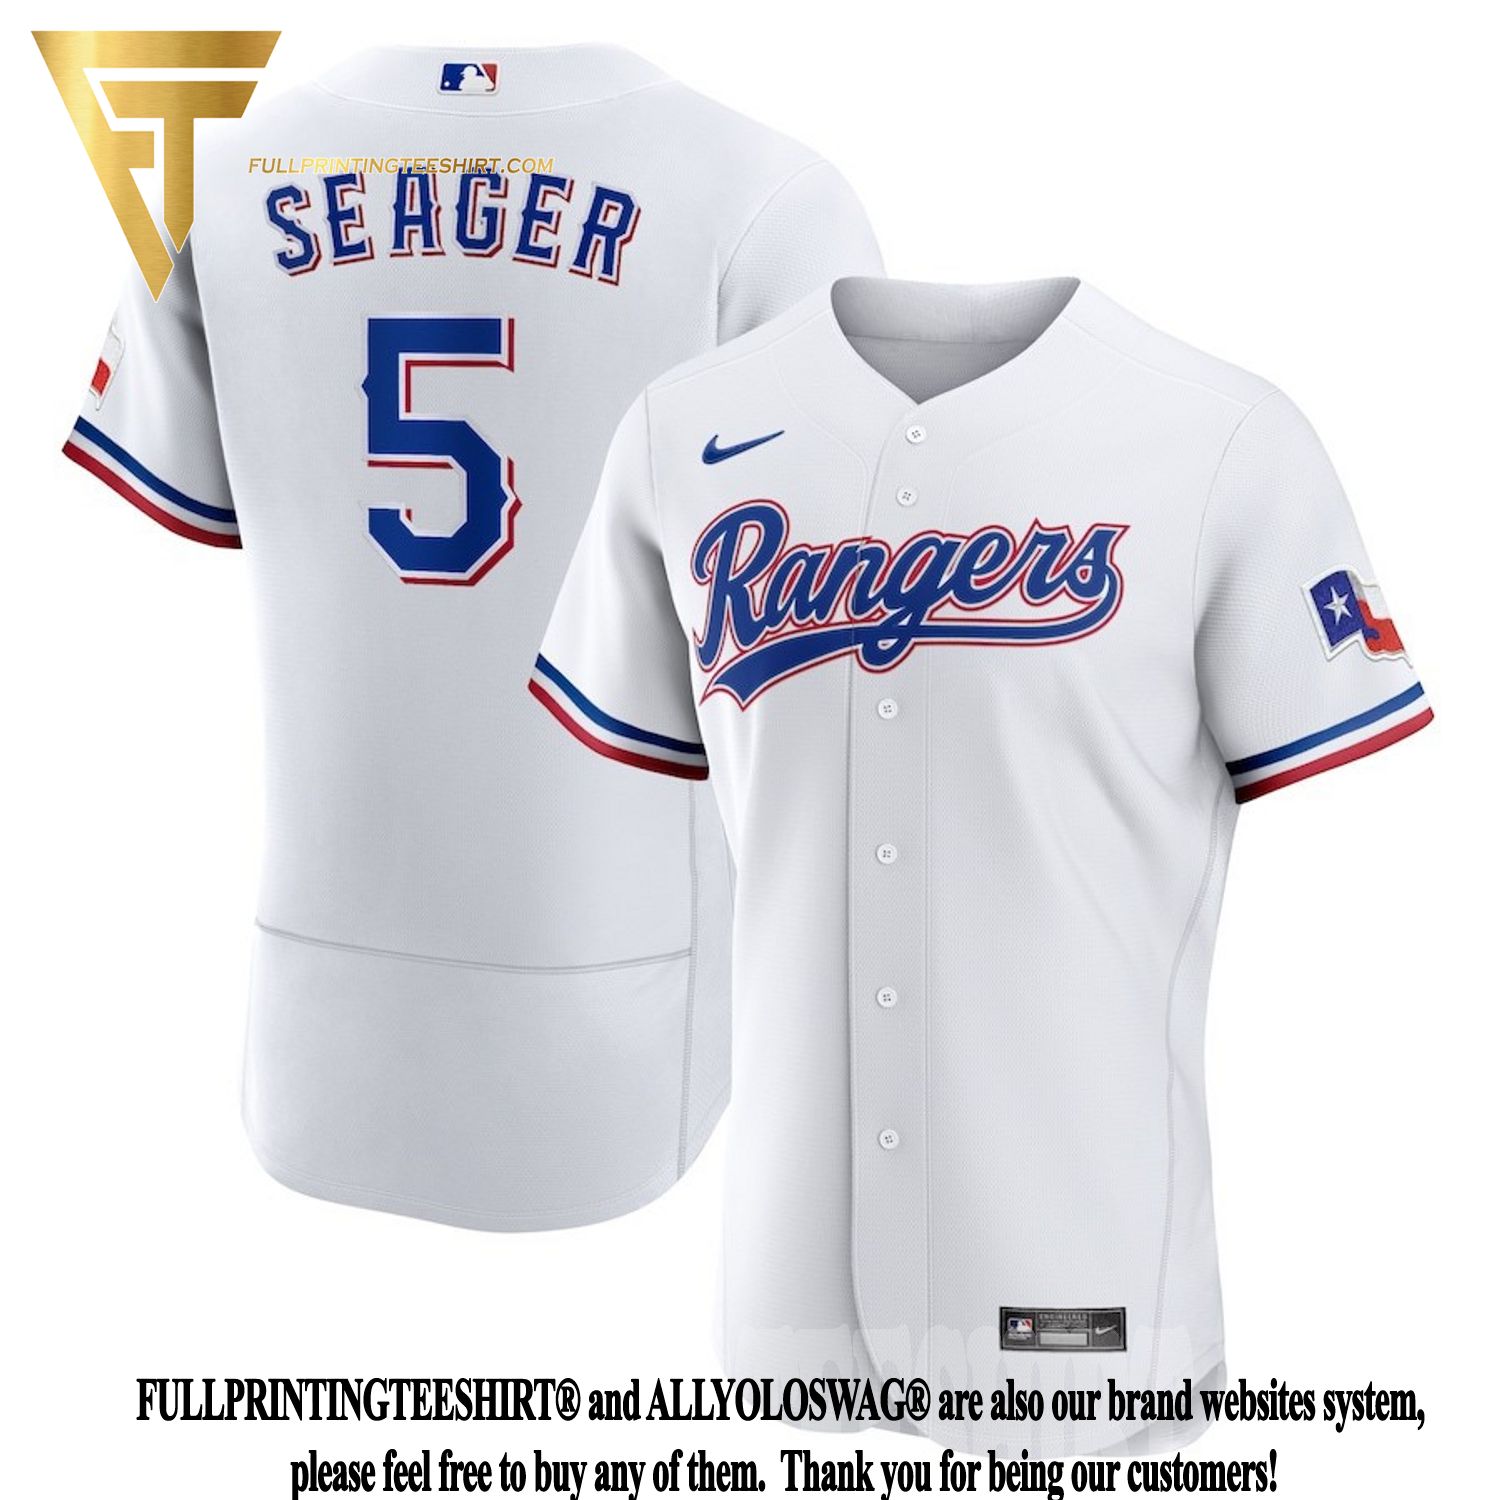 corey seager jersey blue